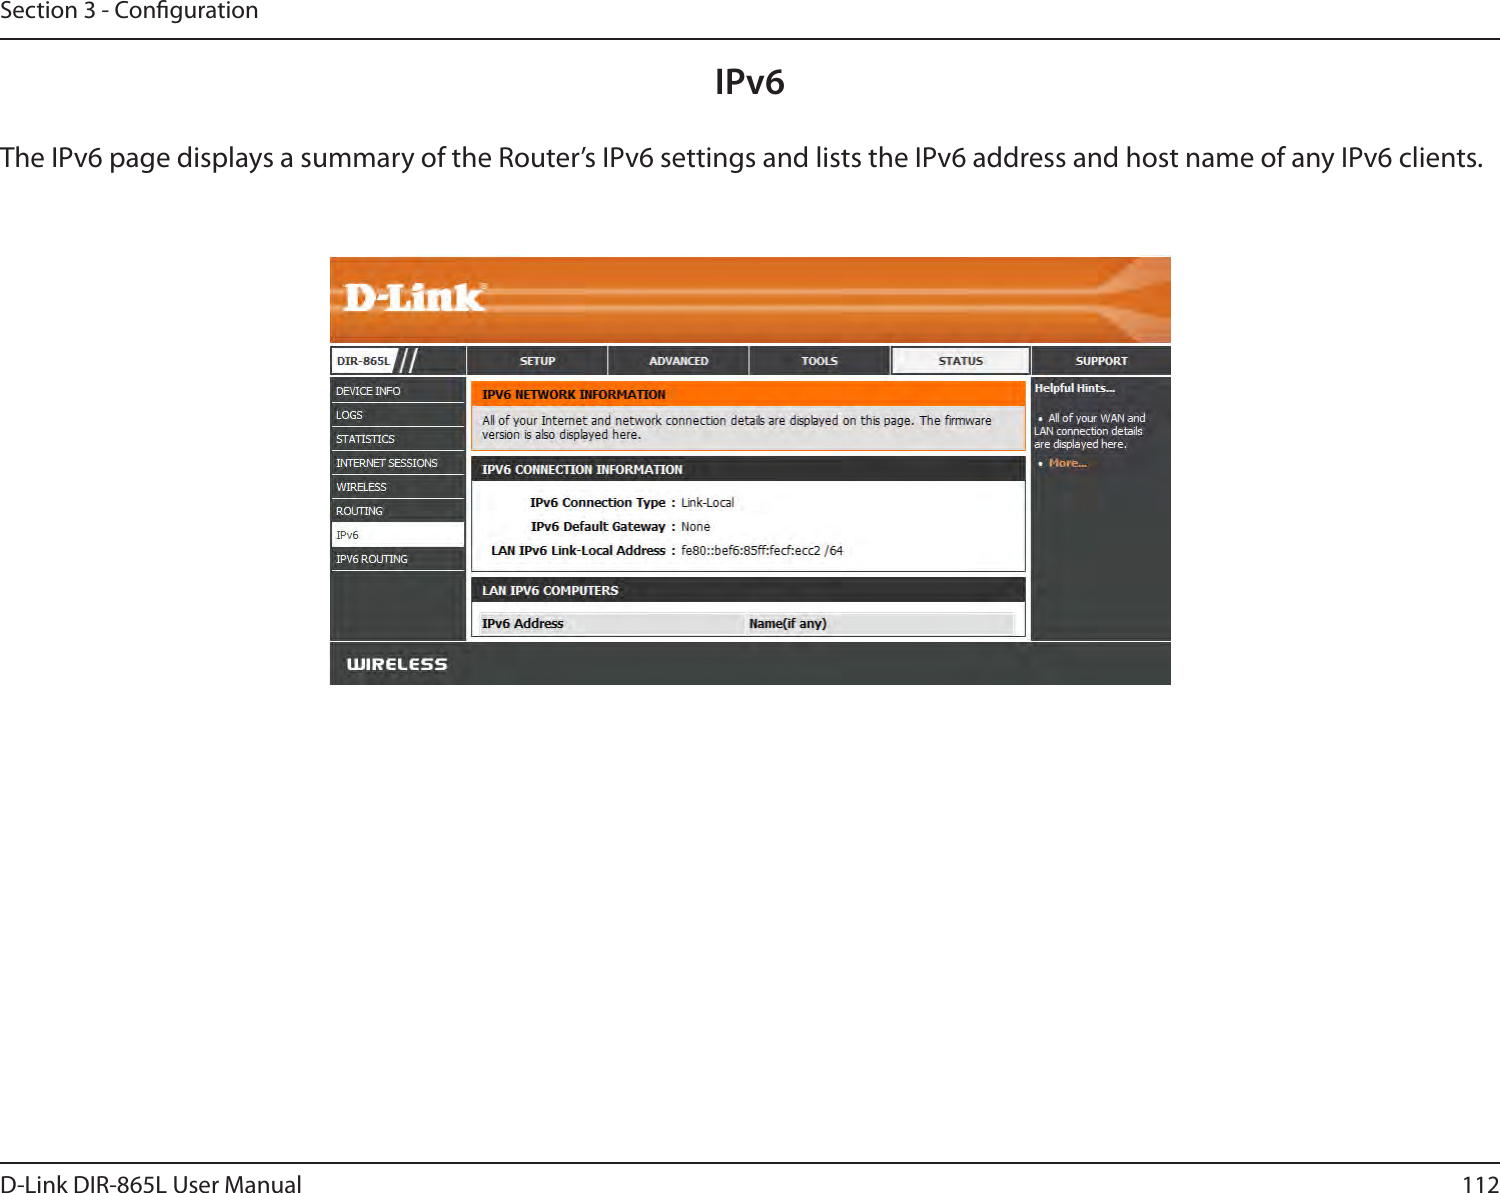 112D-Link DIR-865L User ManualSection 3 - CongurationIPv6The IPv6 page displays a summary of the Router’s IPv6 settings and lists the IPv6 address and host name of any IPv6 clients. 